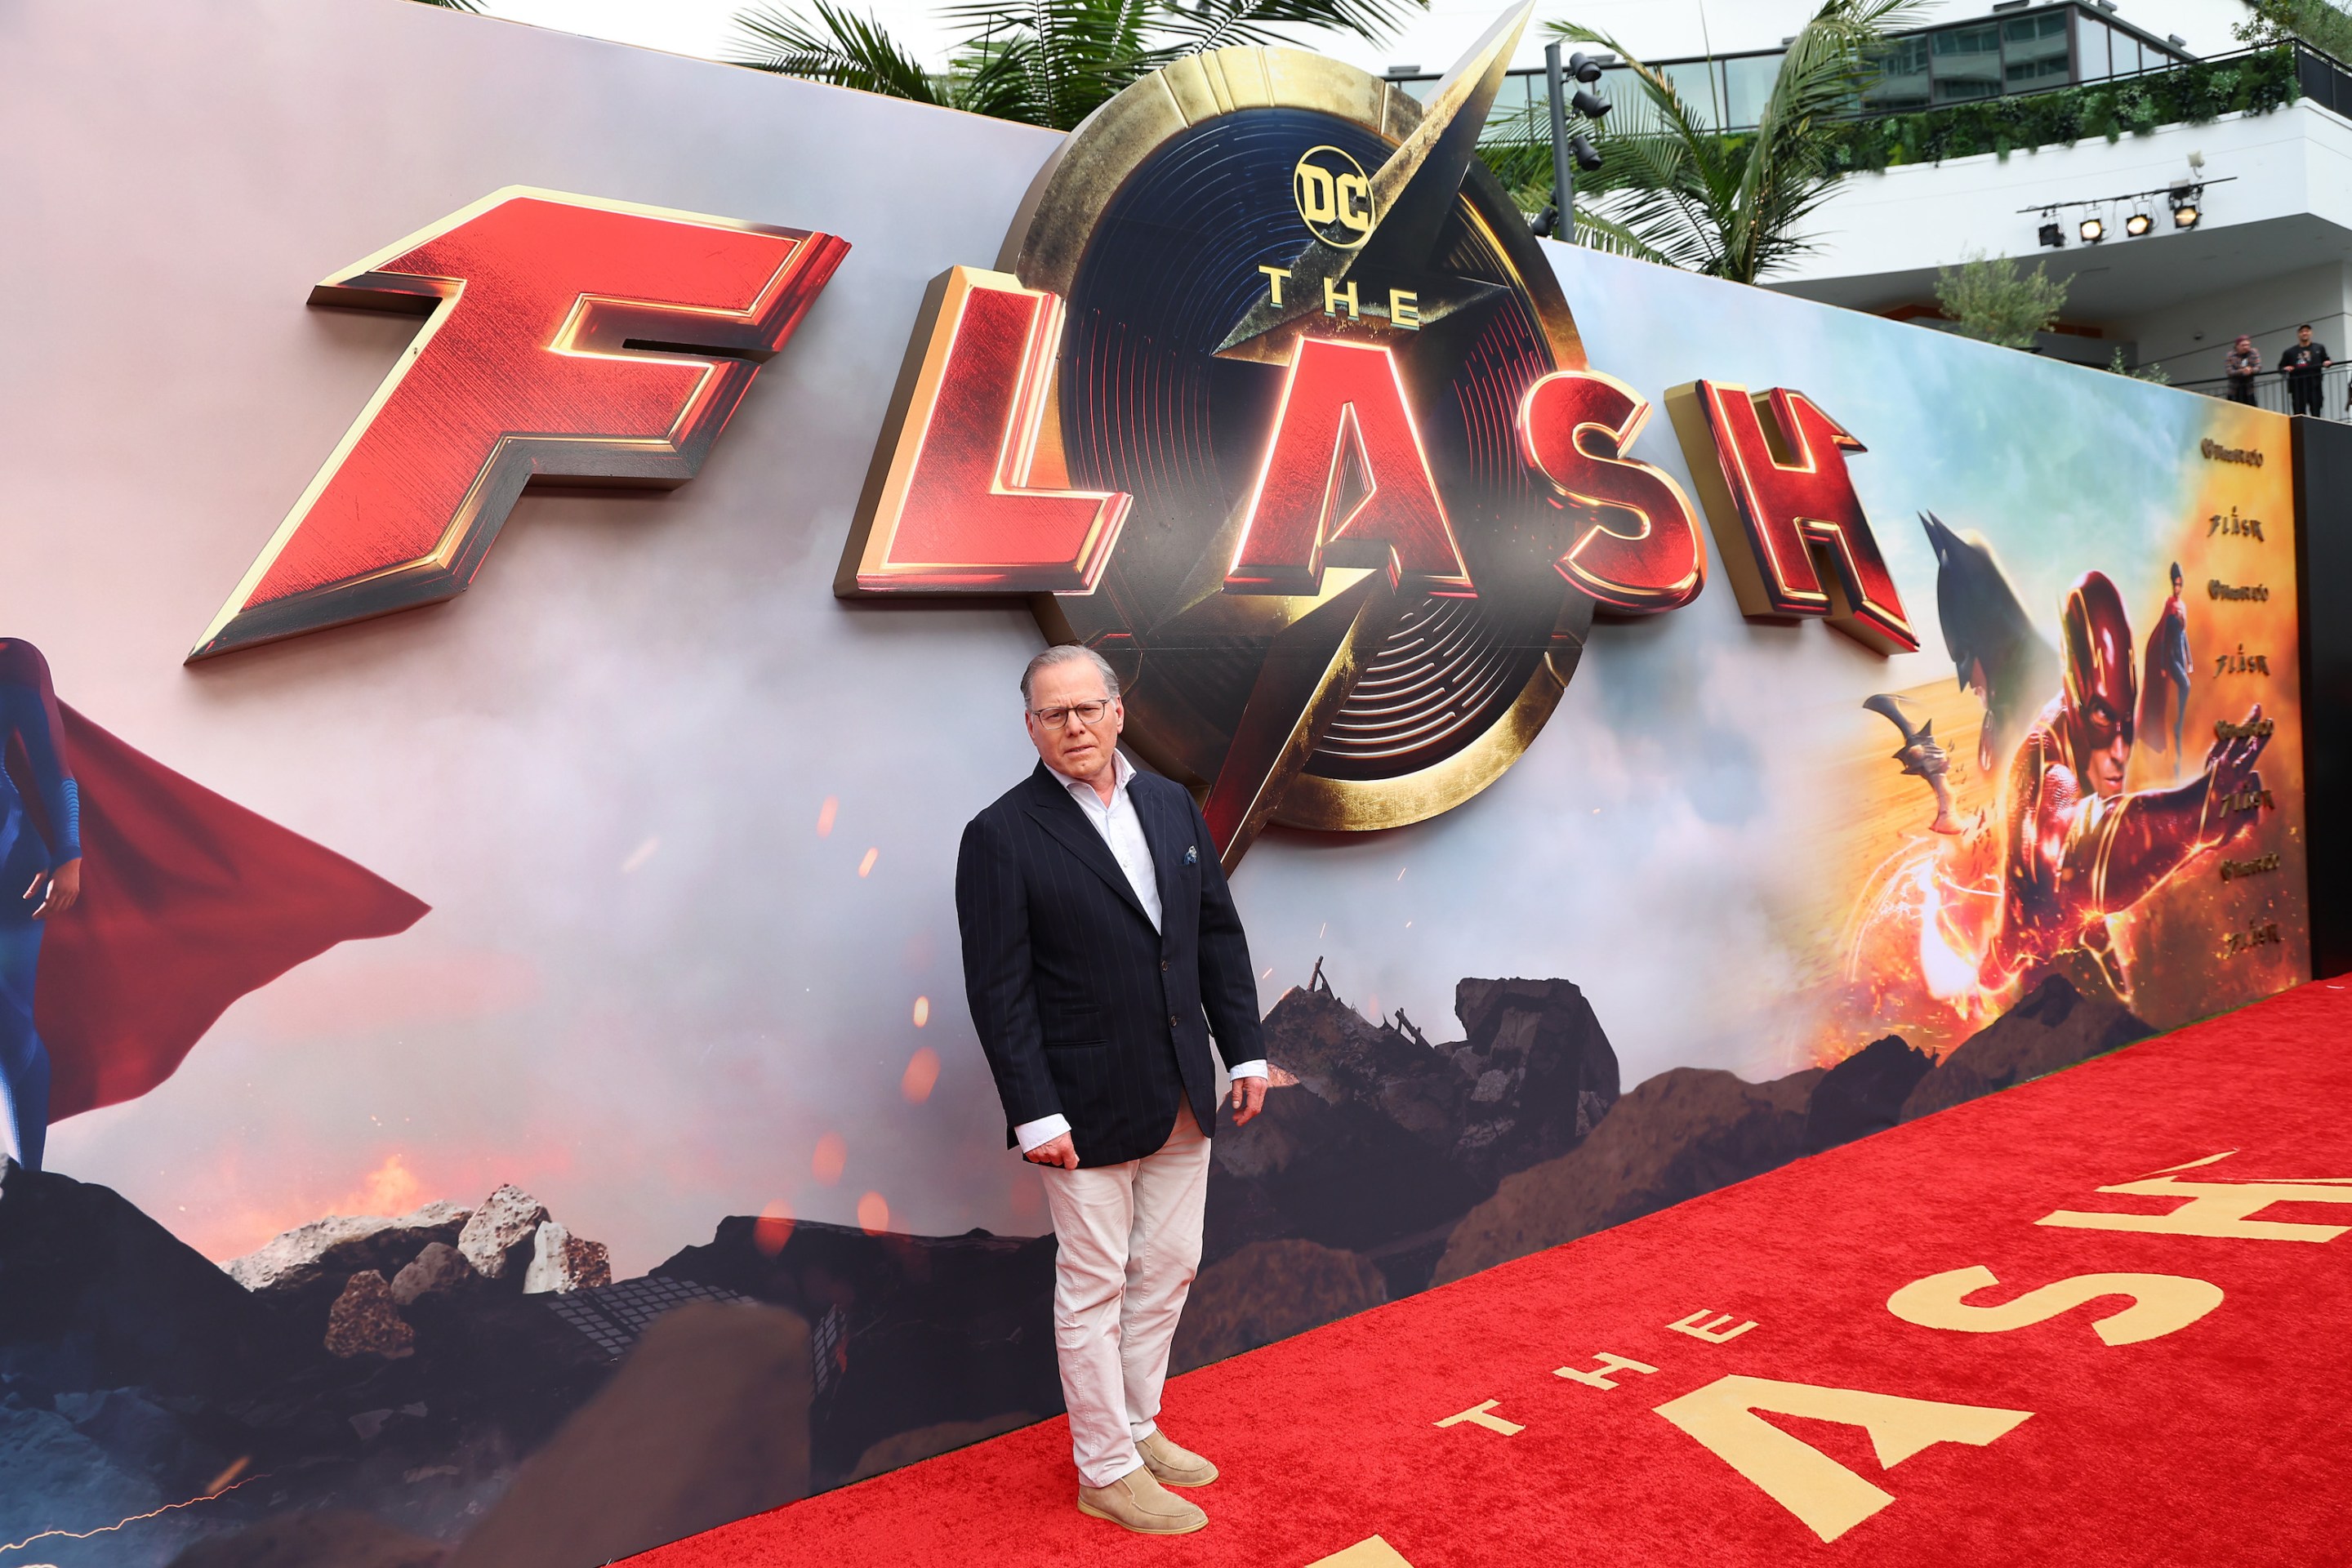 Warner Bros. Discovery chief David Zaslav attends the premiere of The Flash in Hollywood.